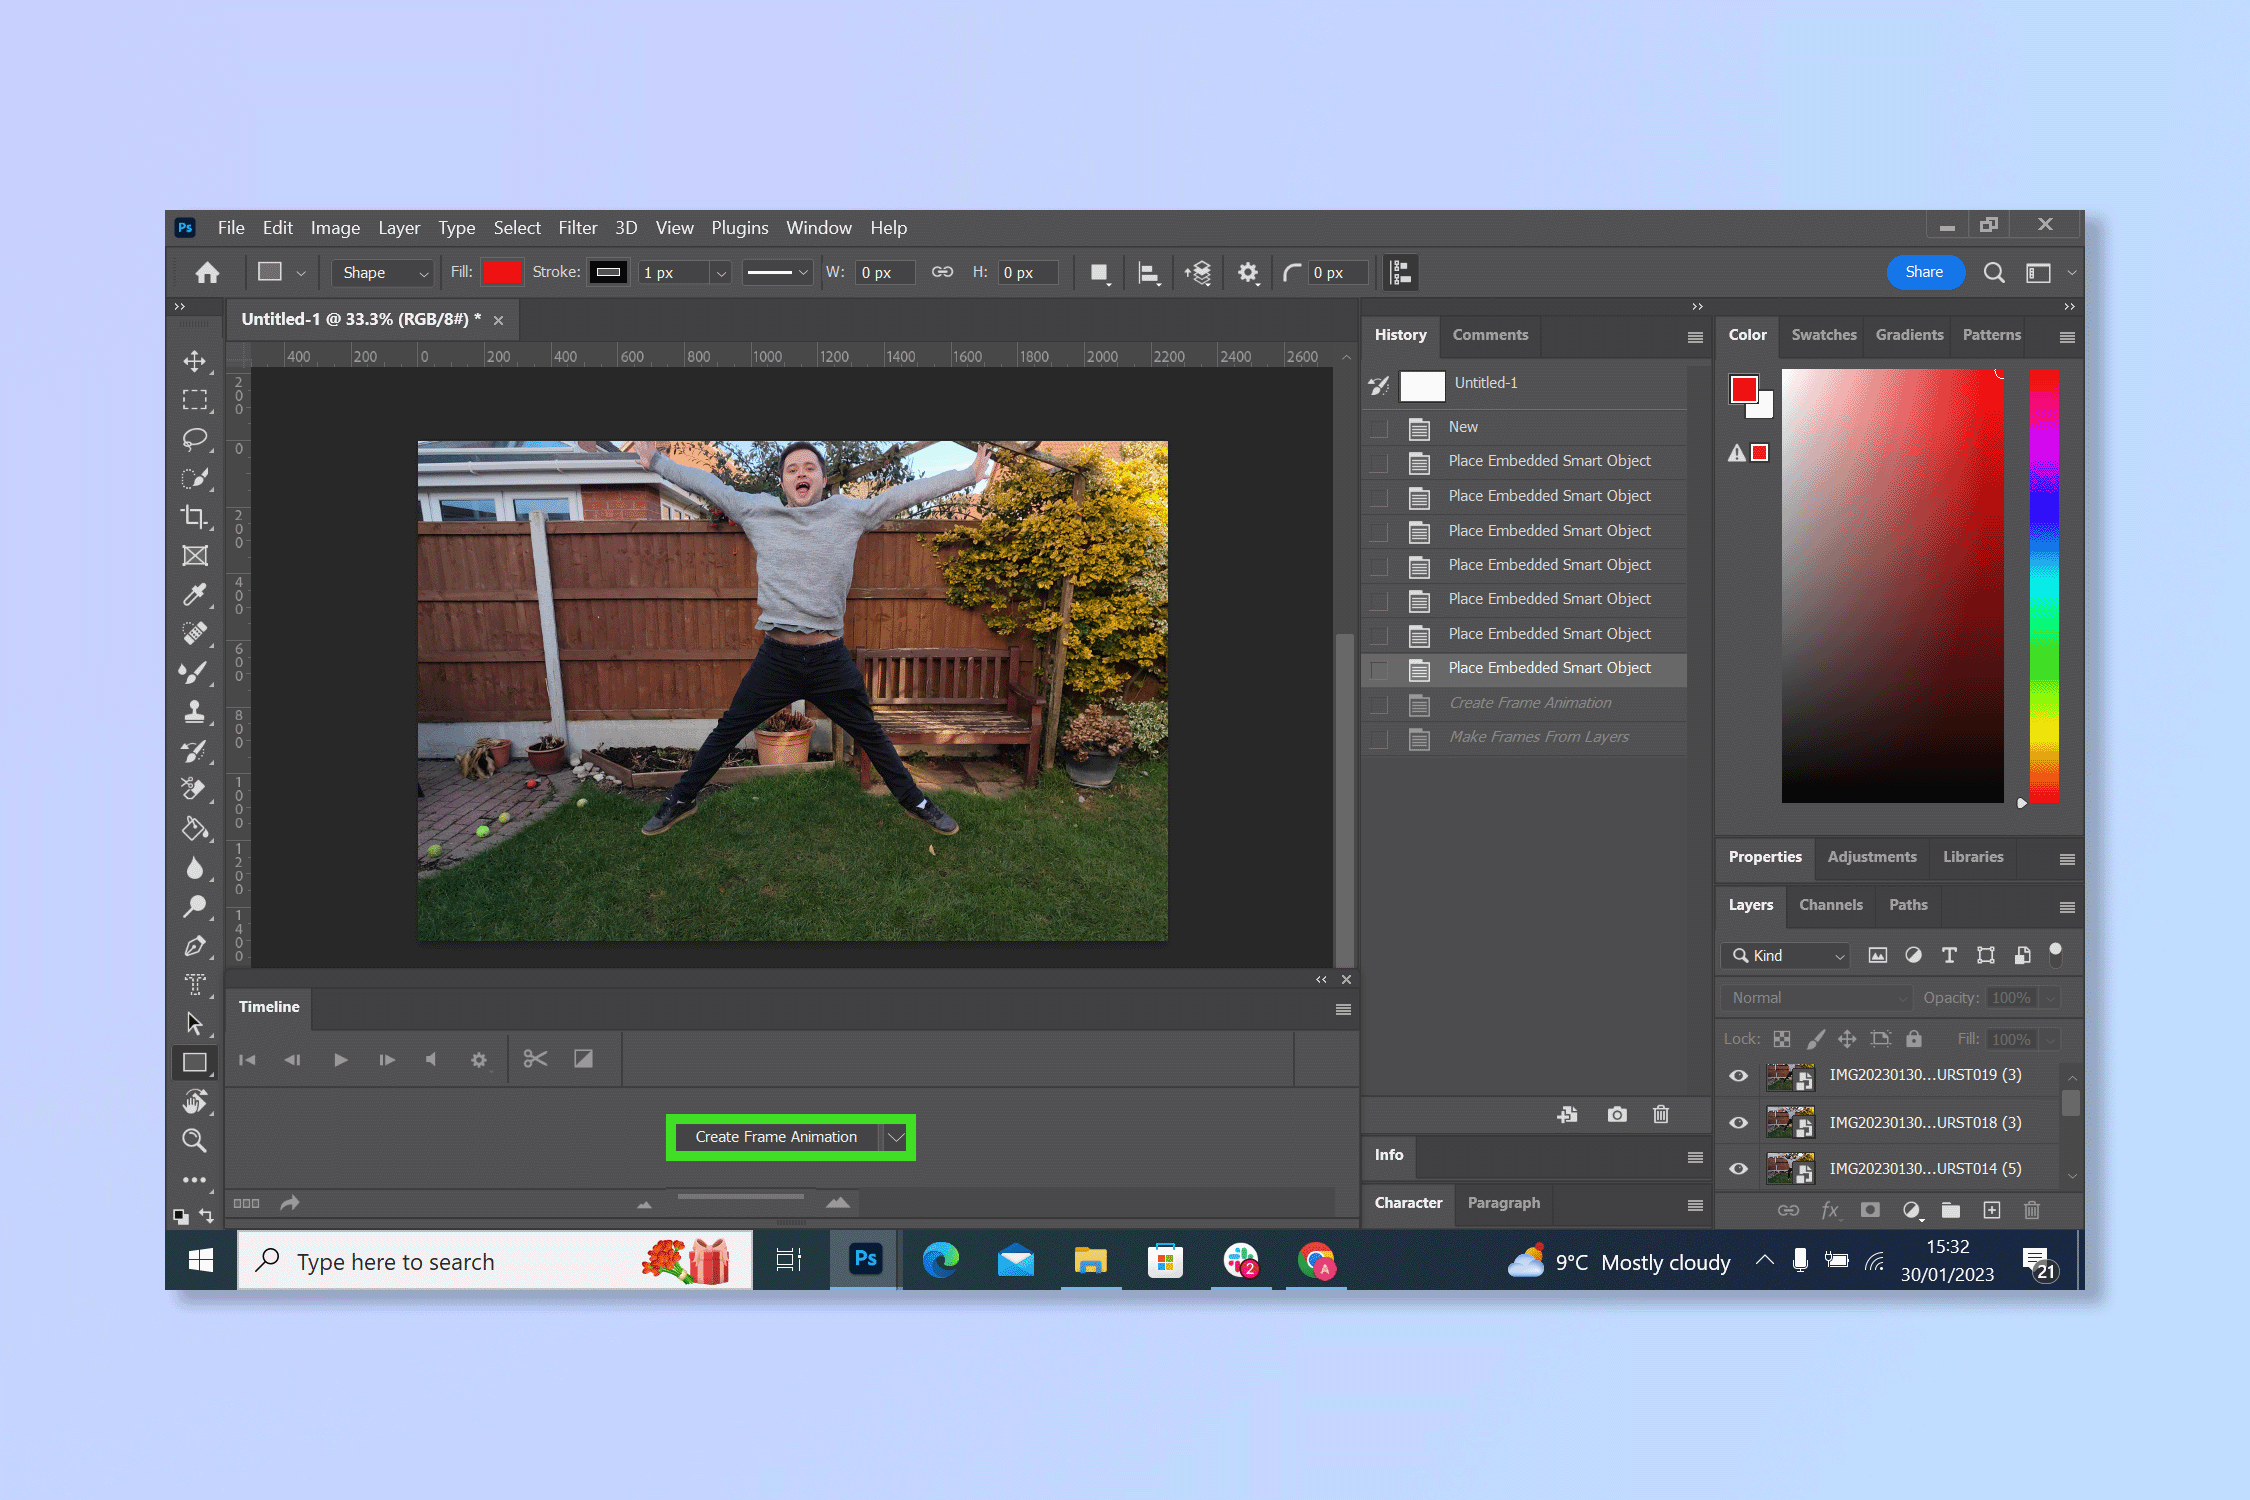 The third step is to create a GIF file in Photoshop